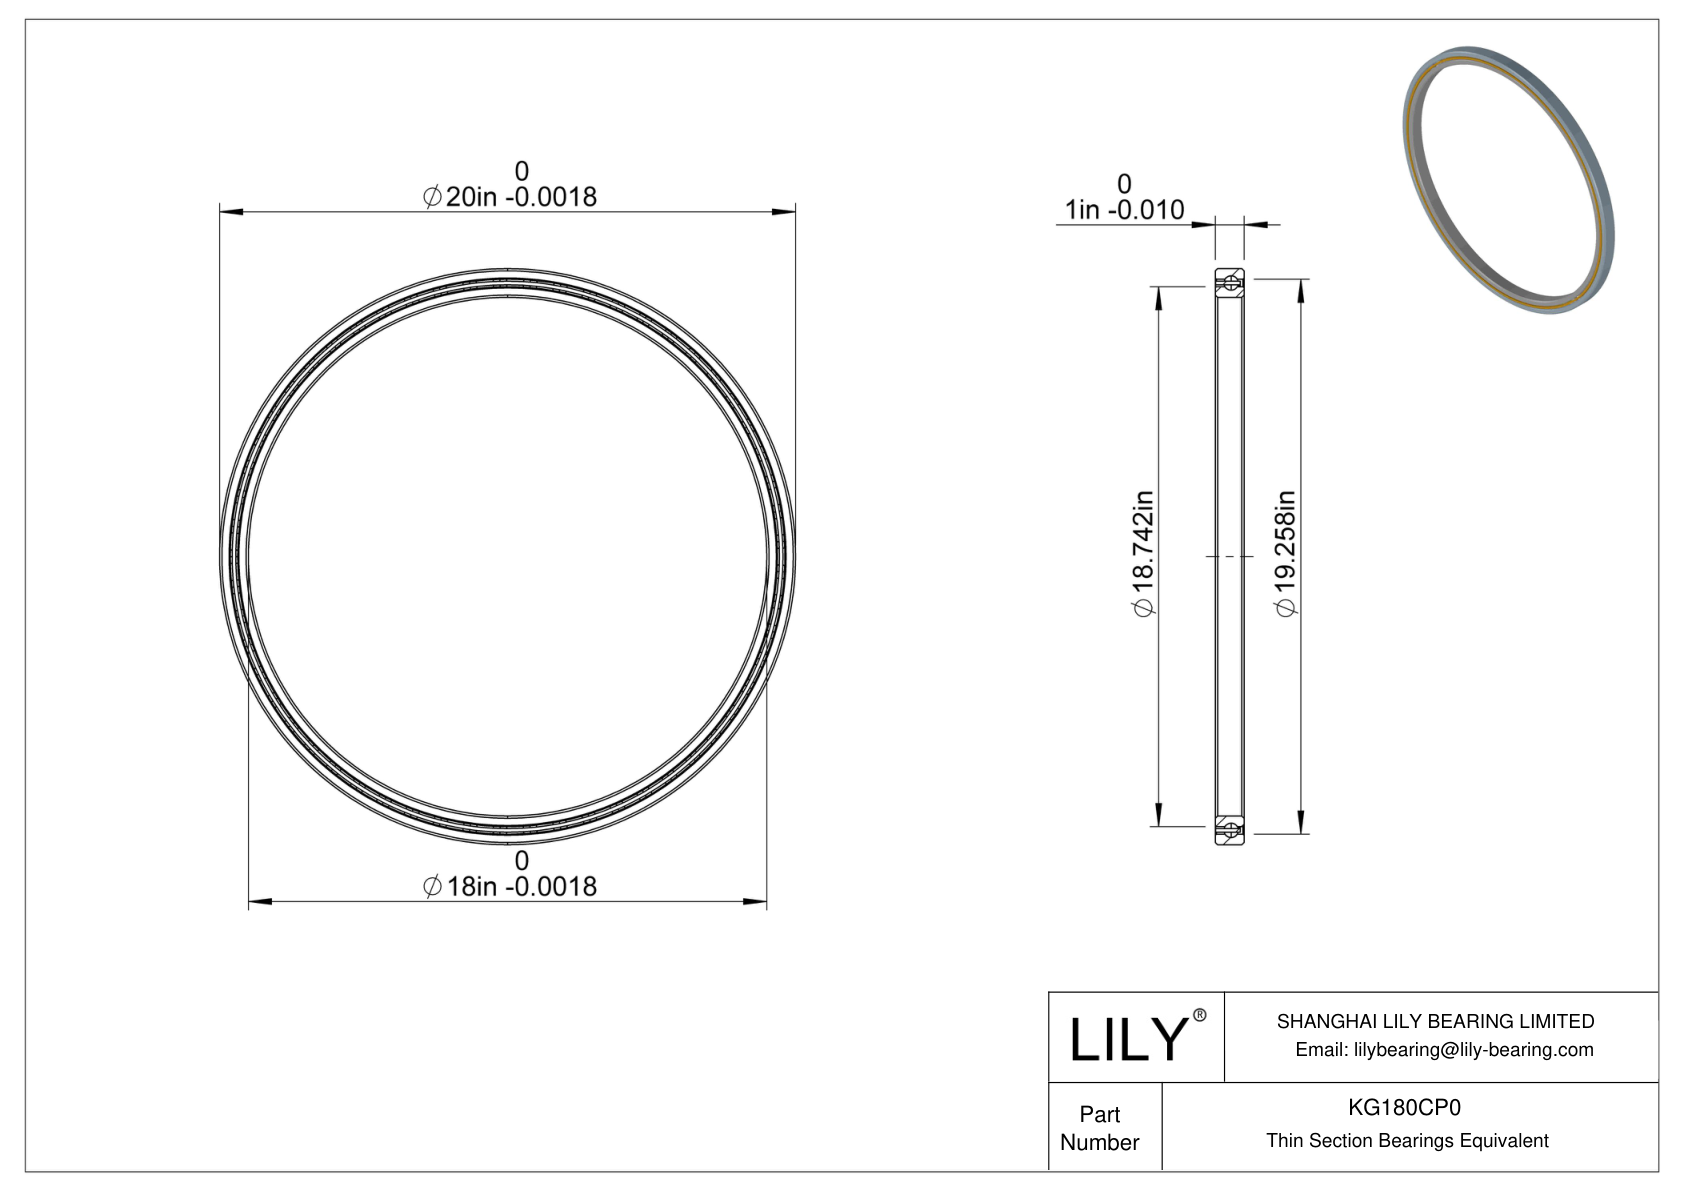 KG180CP0 Constant Section (CS) Bearings cad drawing